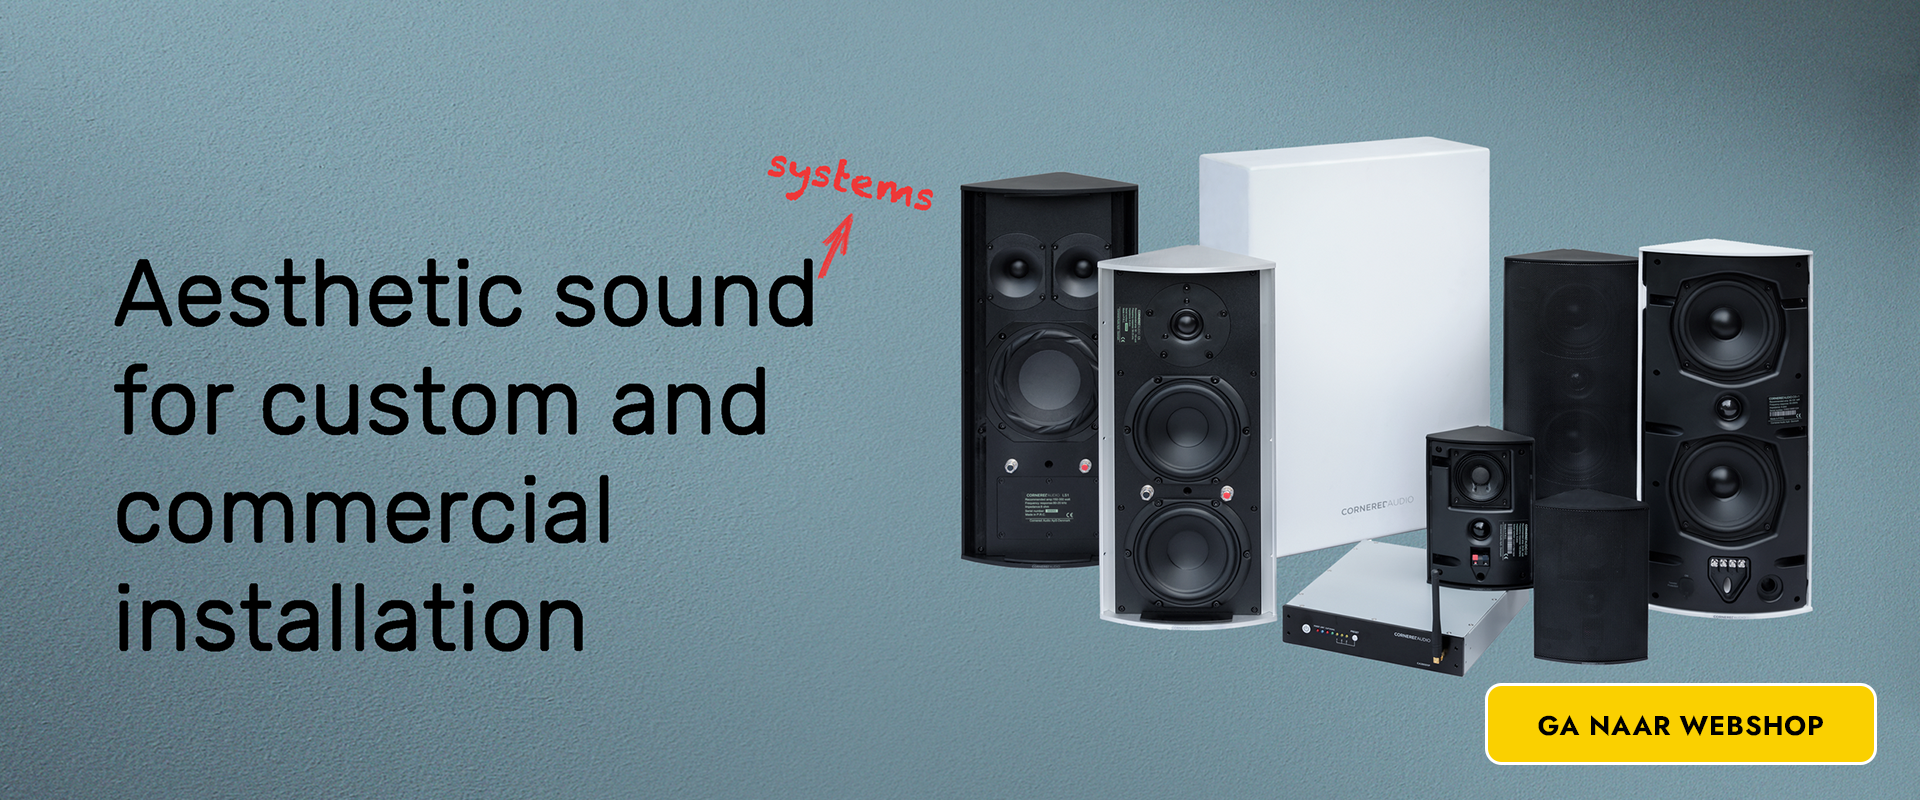 Cornered Audio - Aestetic soundsystems for custom and commercial installation